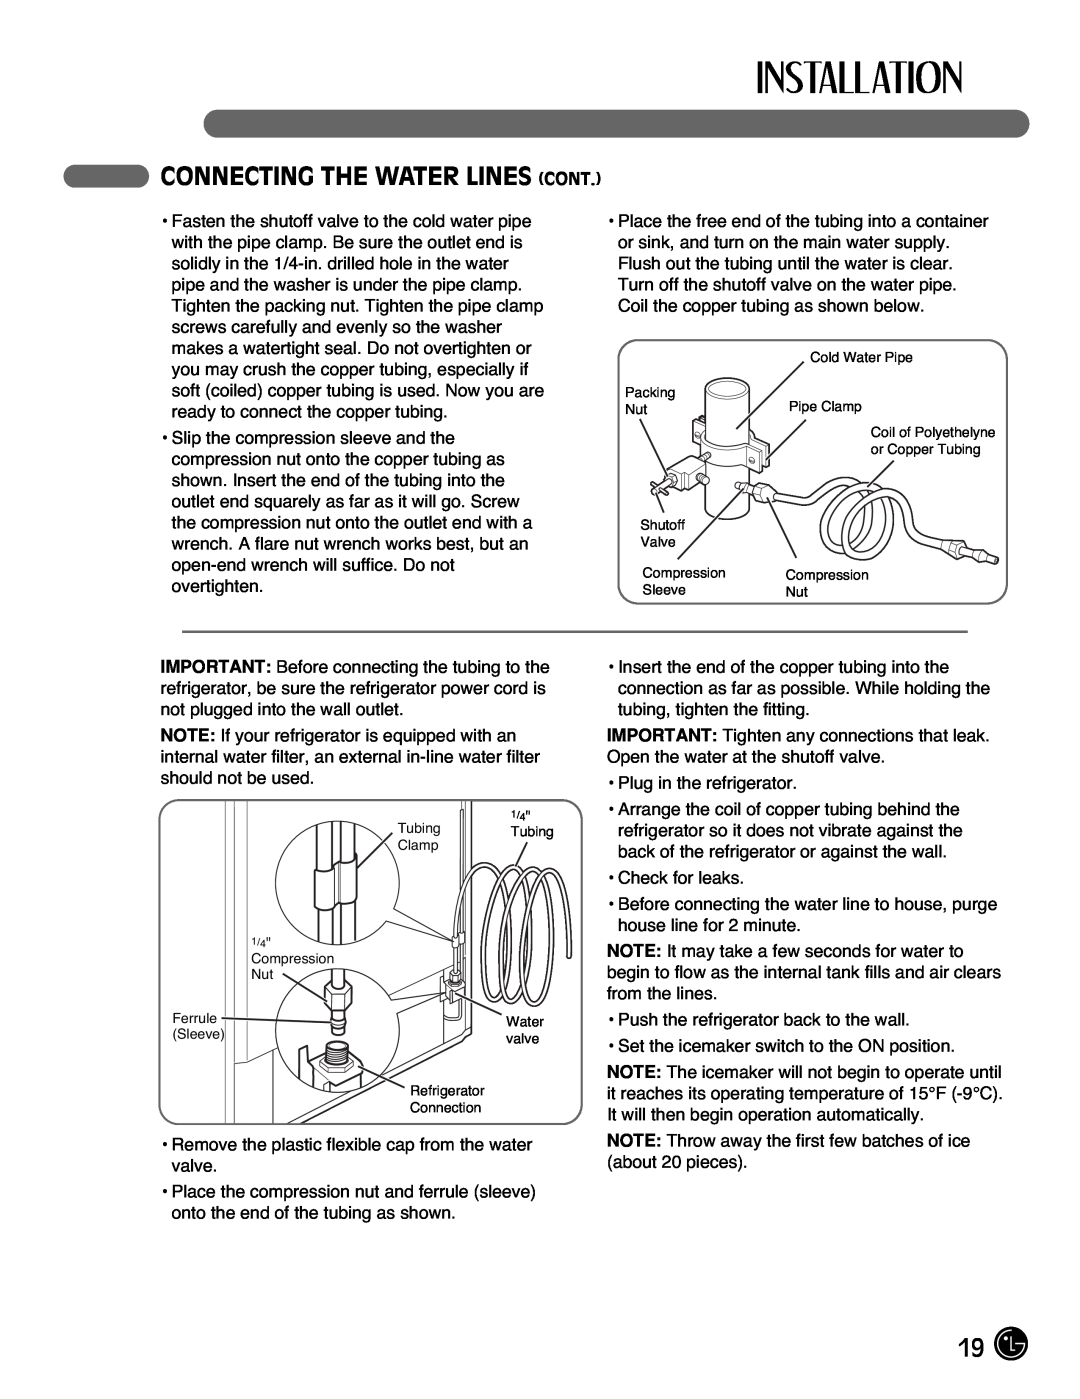 LG Electronics LMX21971, LMX25981**, LMX2525971, LMX21981** manual Connecting The Water Lines Cont 